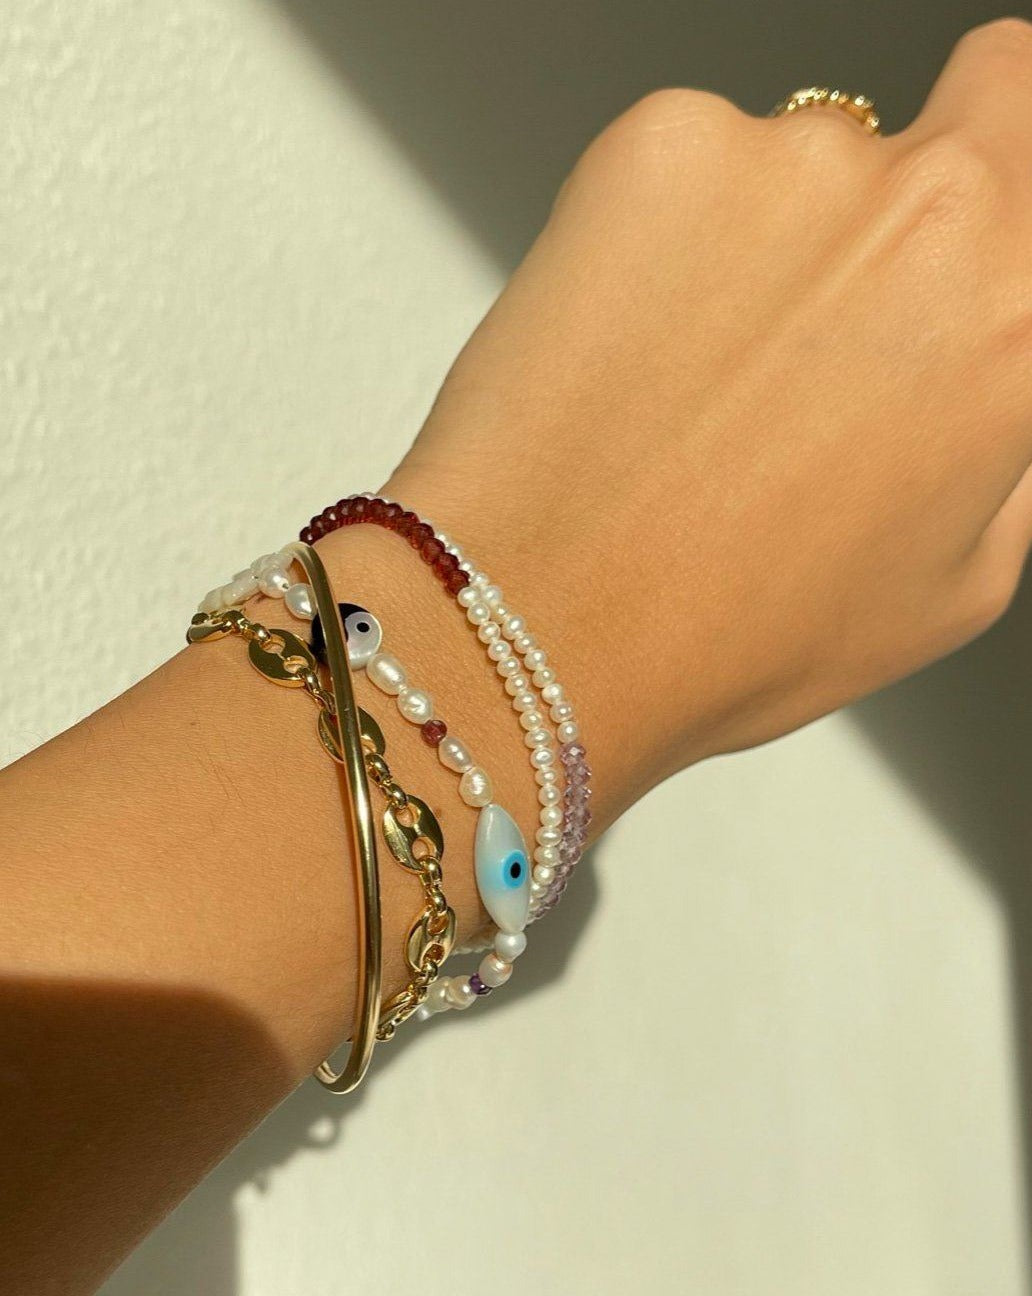 Lexie Bracelet by KOZAKH. A 6 to 7 inch adjustable length bracelet in 14K Gold Filled, featuring Pink Tourmaline slice, Mother of Pearl butterfly charm, round cut Malachite gemstone, Mother of Pearl eye charm, and 2.5mm to 3mm Fresh water pearls.